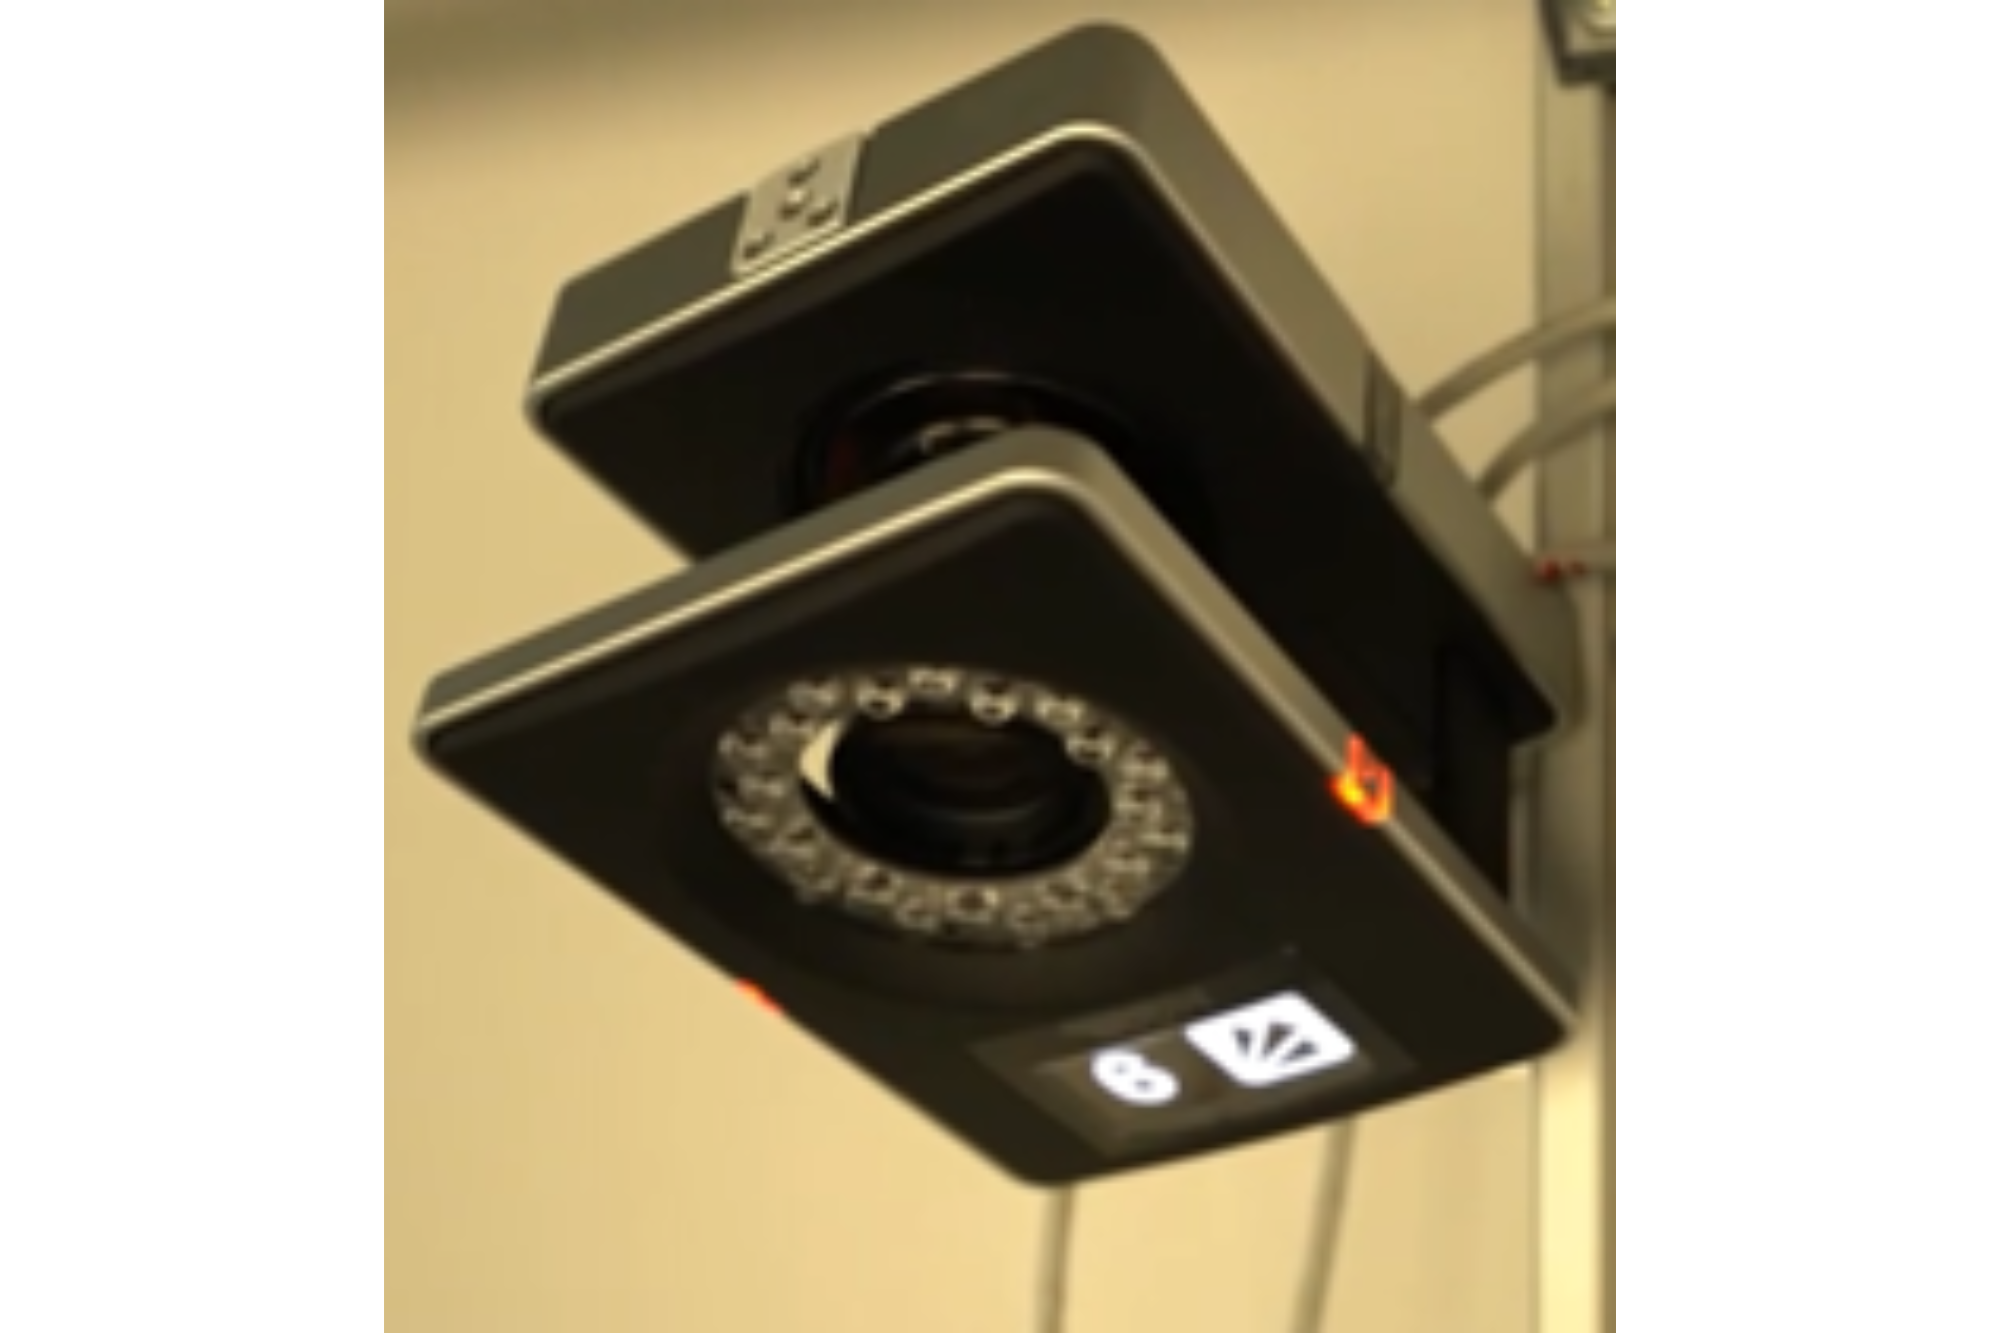 Three selected cameras with people tracking